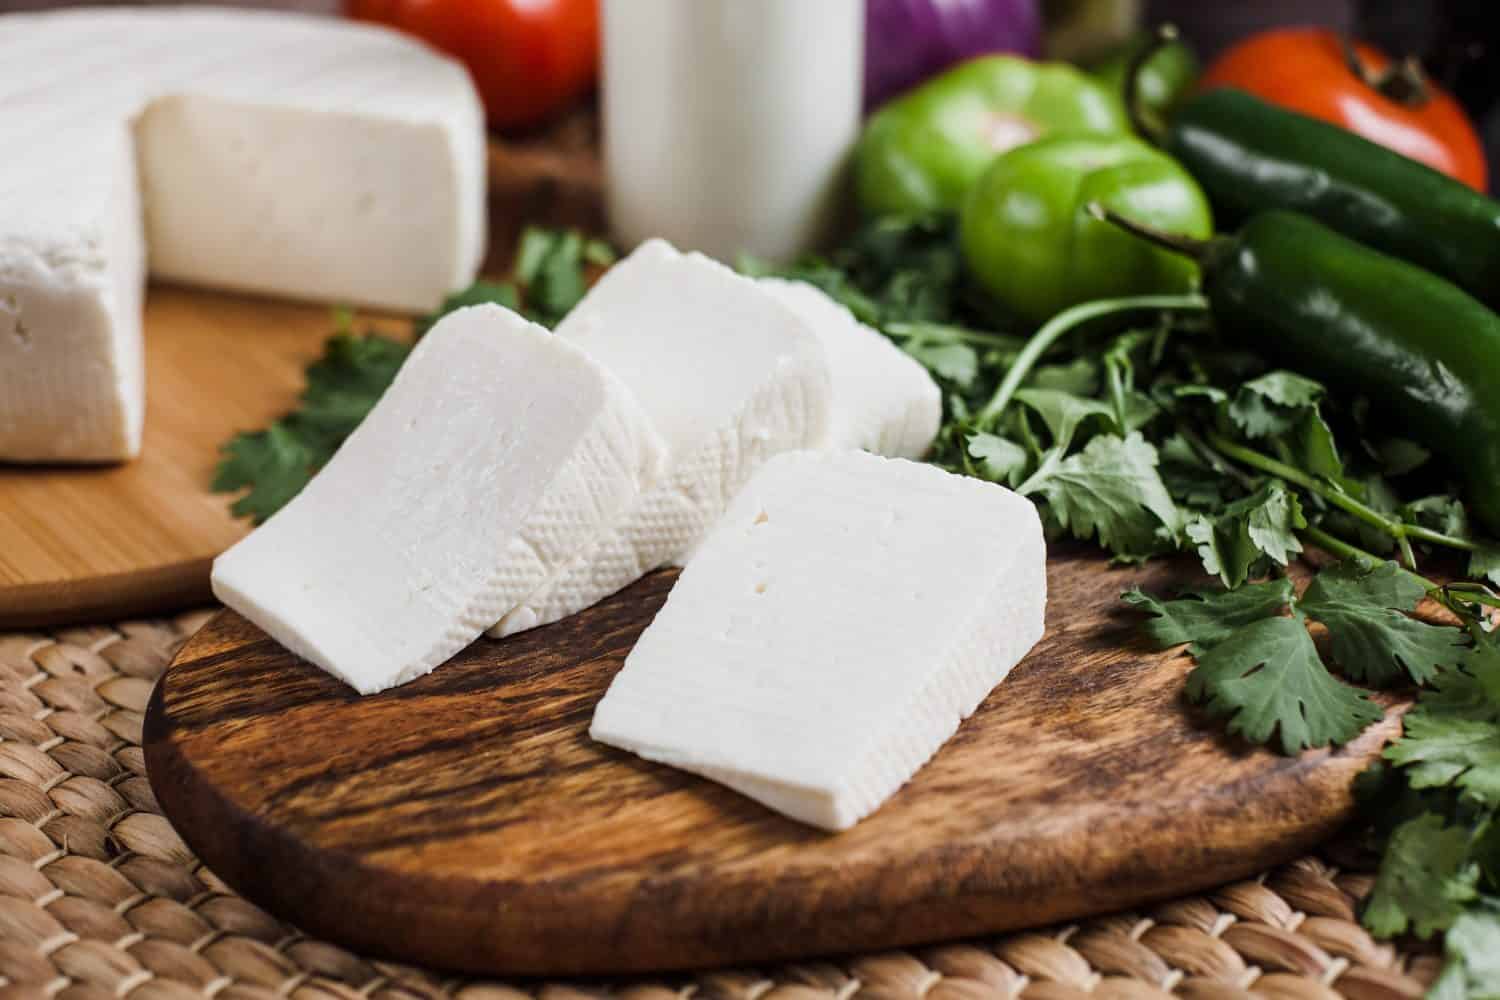 Mexican white panela cheese with fresh ingredients in Mexico Latin America